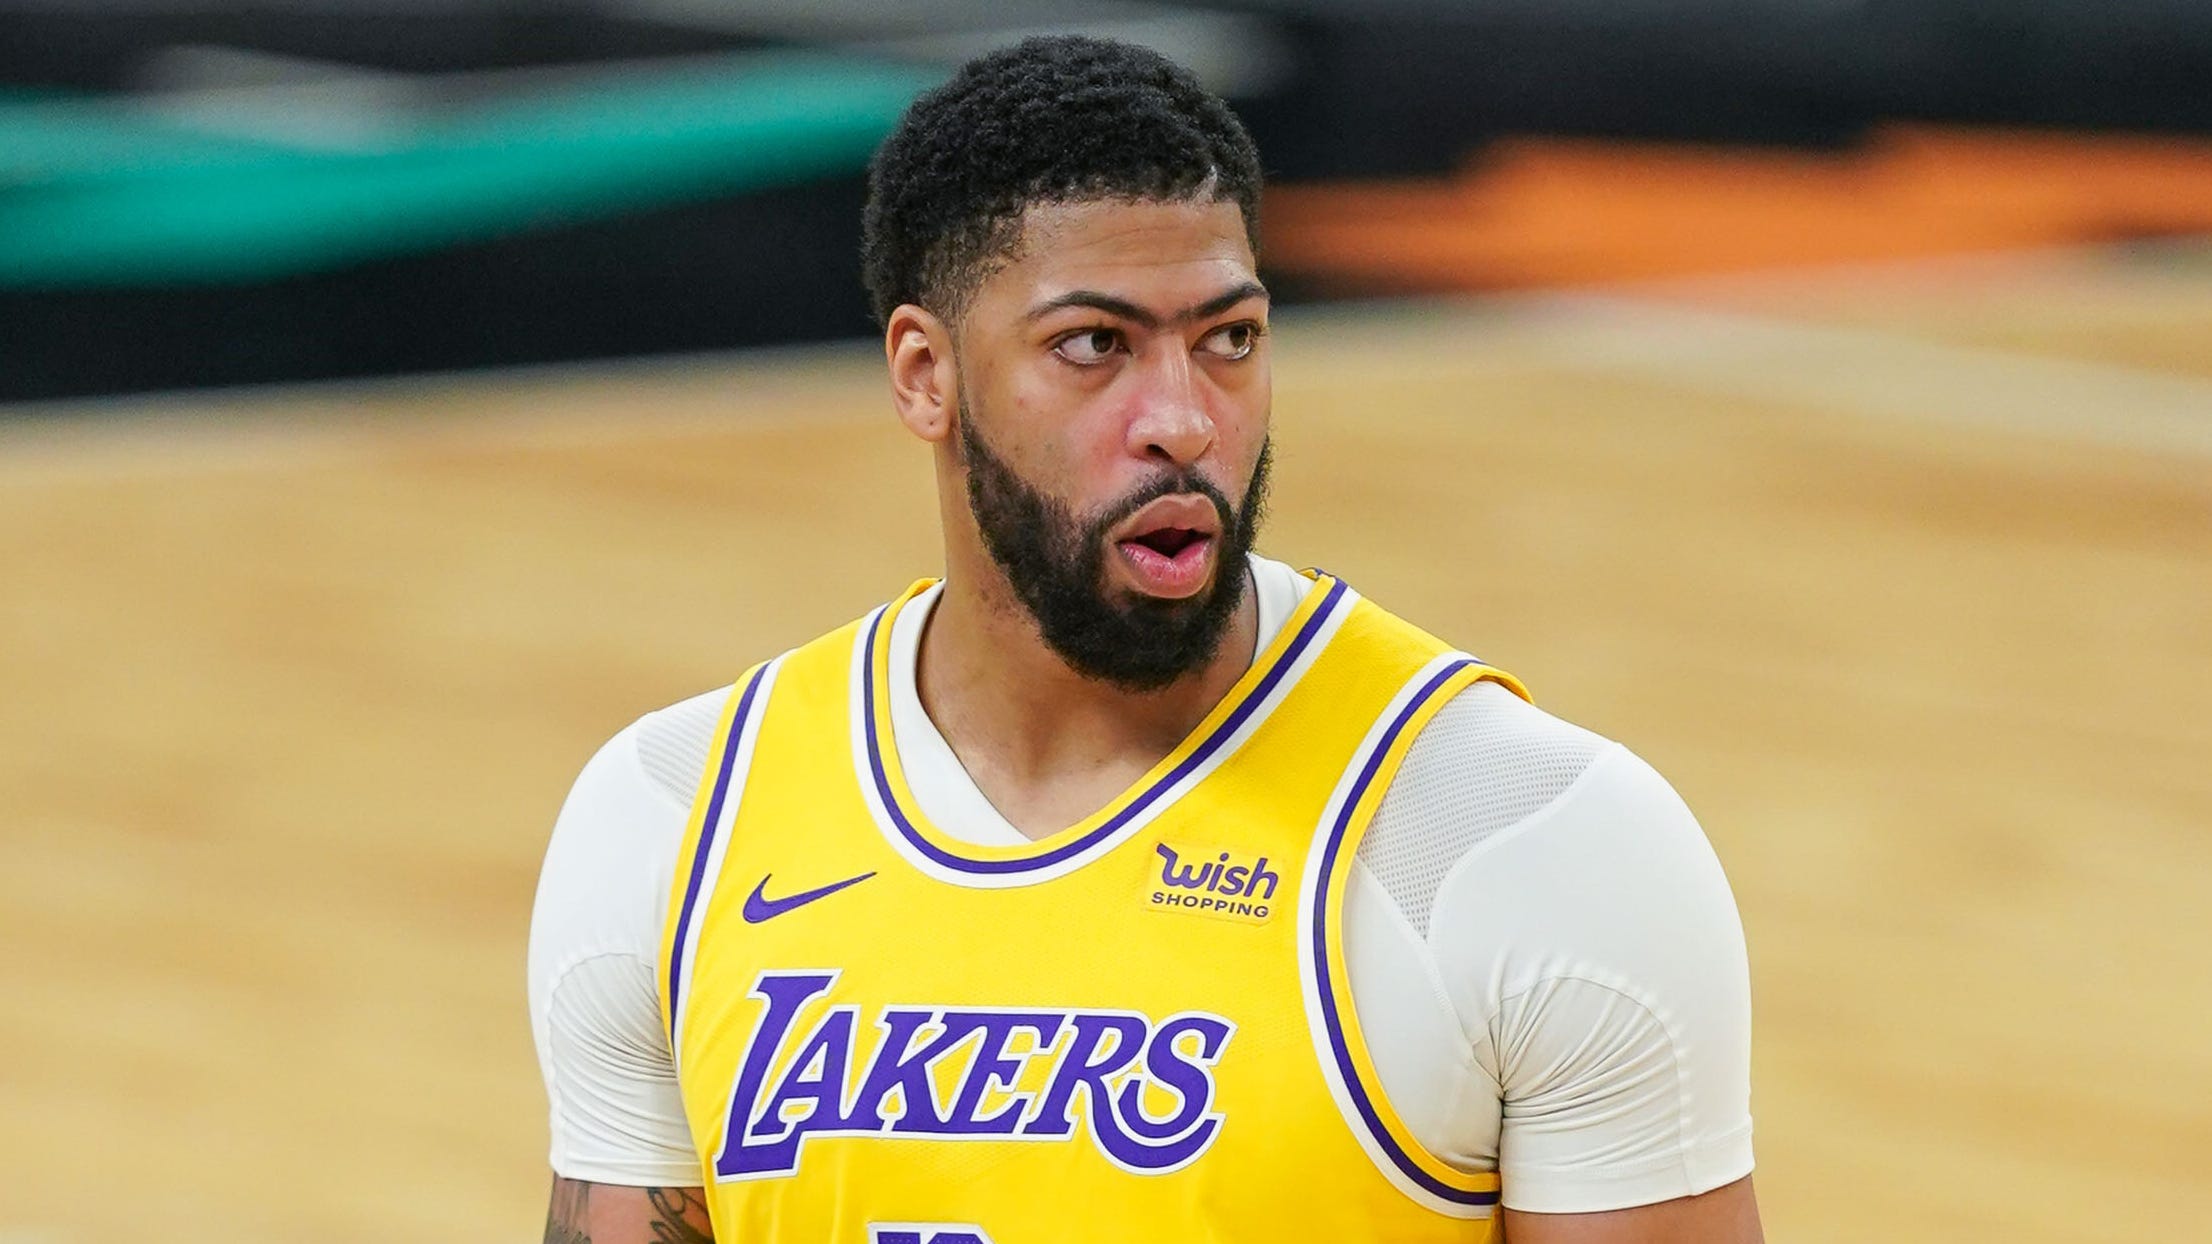 Anthony Davis / S9tdvpxm Ylhim / Anthony davis has message for haters who called him soft after lakers game 1 loss to suns the los angeles lakers dropped game 1 to the phoenix suns and anthony davis is taking responsibility for.